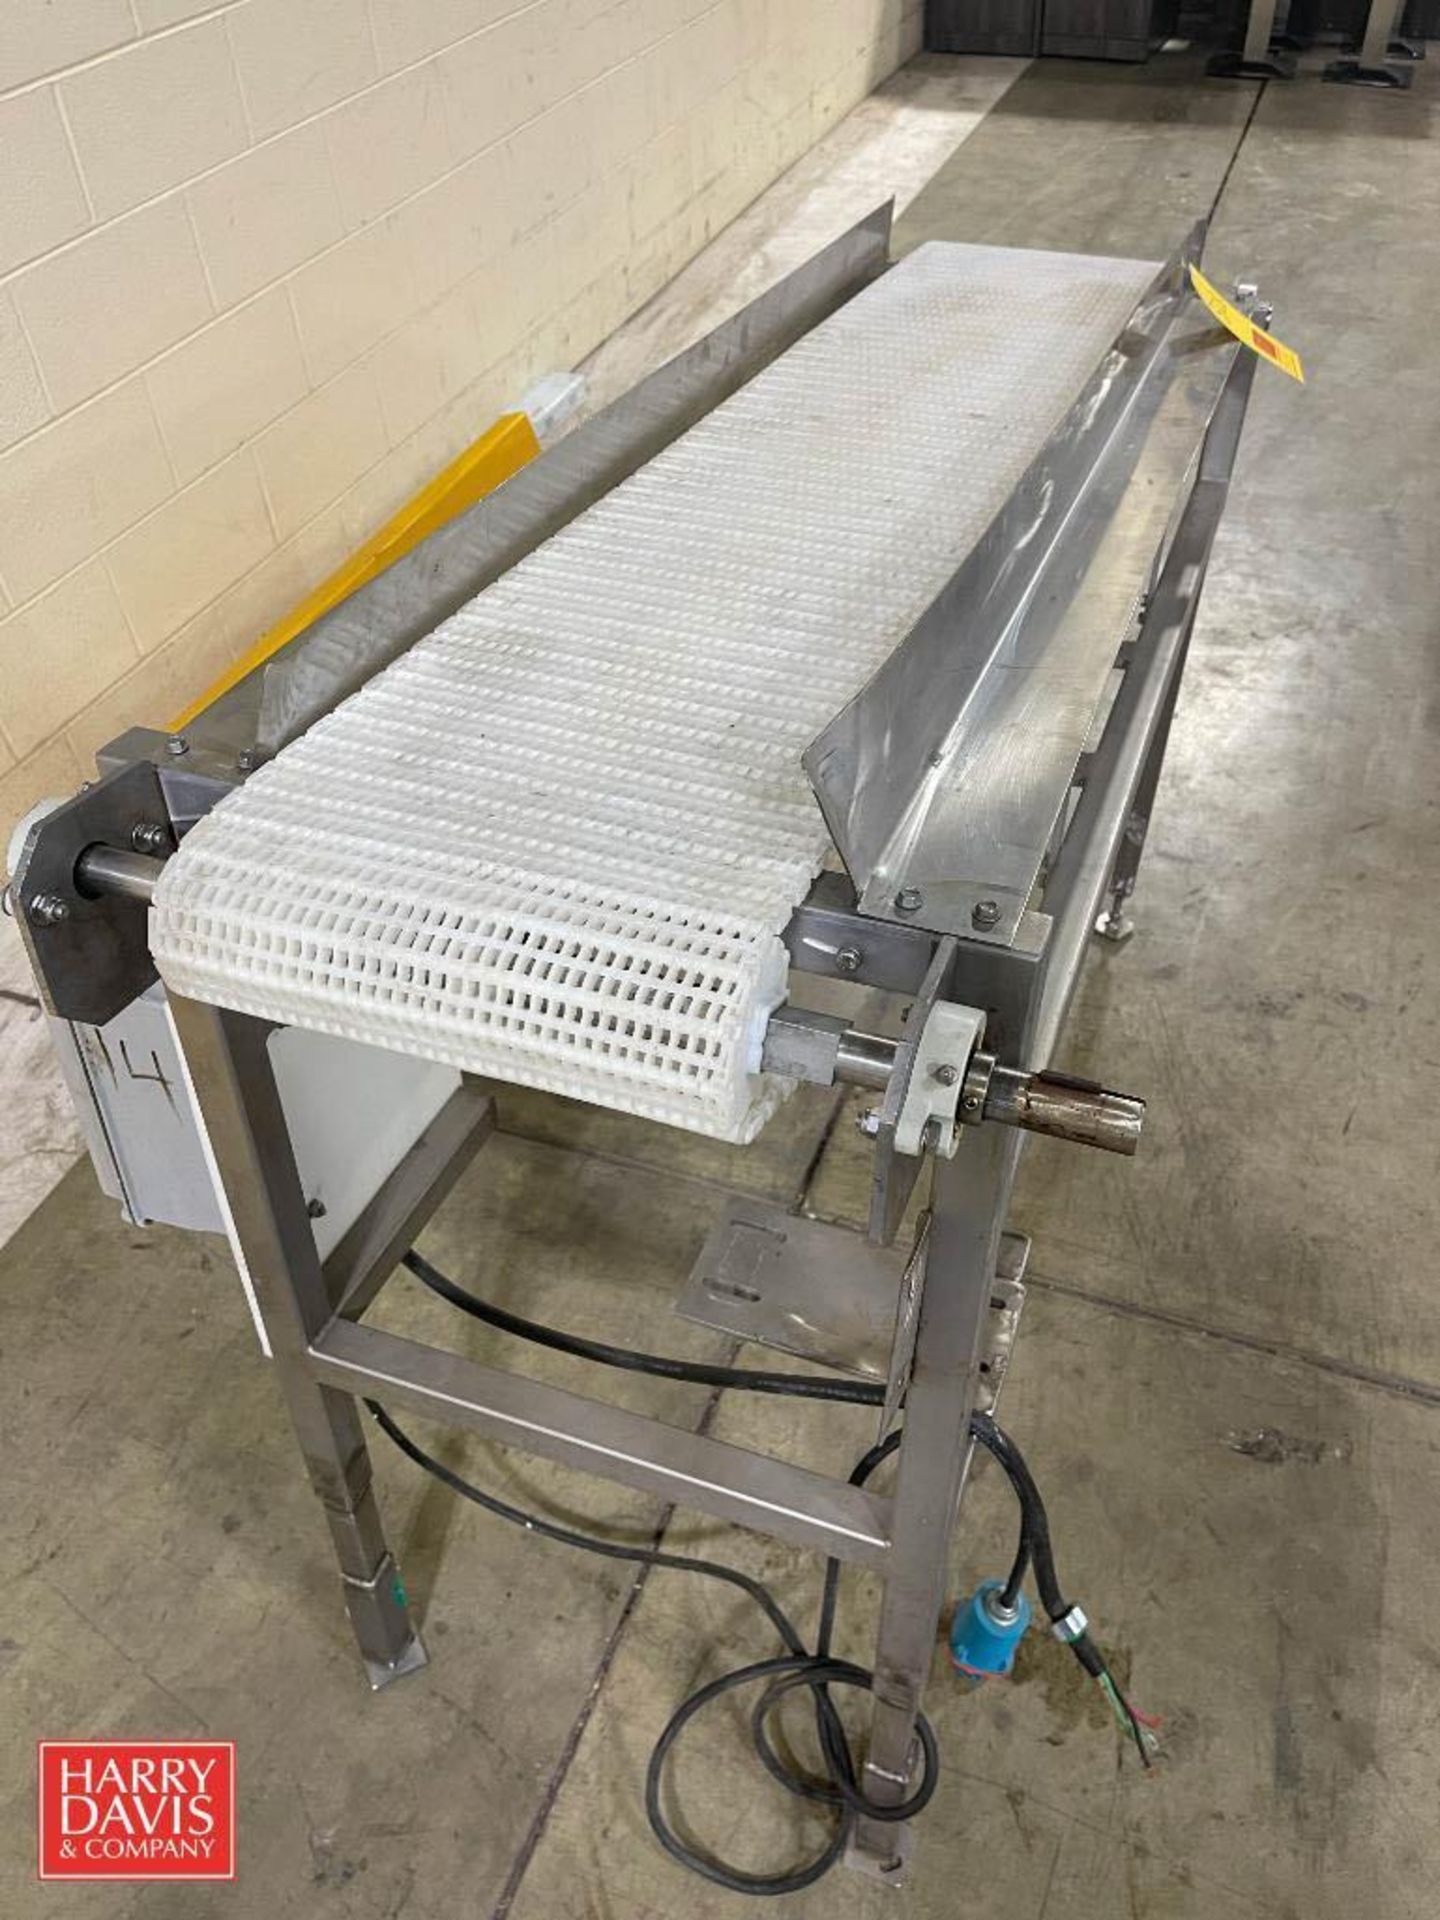 S/S Frame Conveyor with Belt and S/S Drive, 8' Length x 18" Width (Location: Denver, CO) - Image 4 of 4